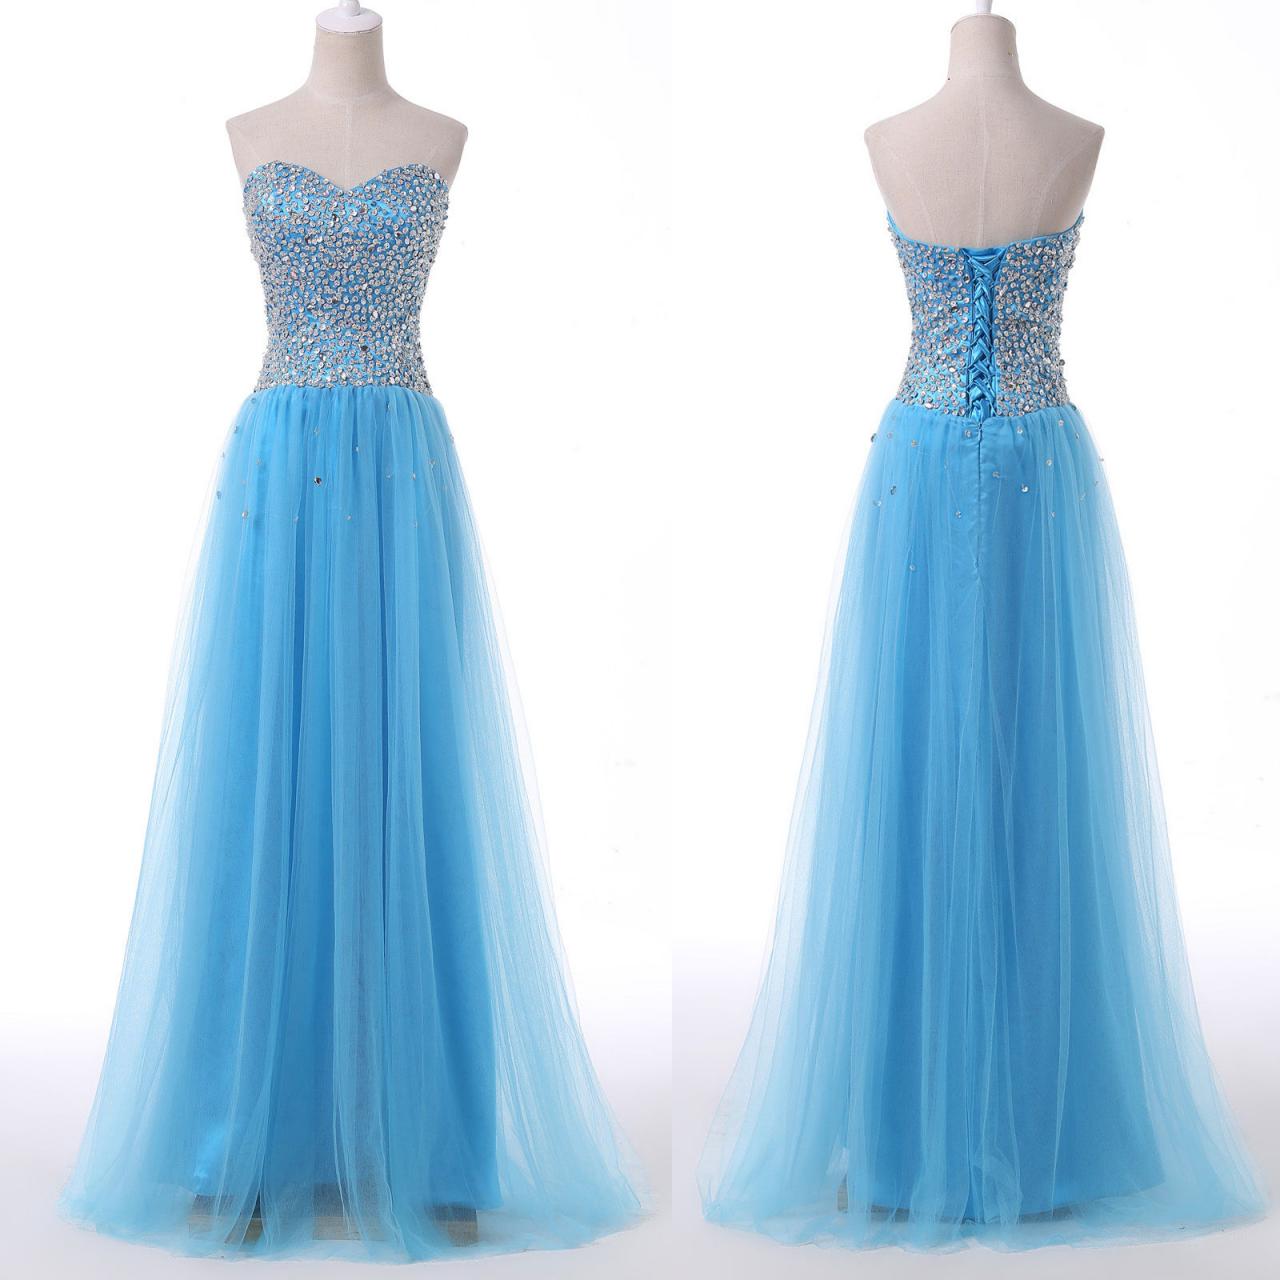 Beautiful Handmade Blue Tulle Long Prom Dress 216, Blue Prom Dresses, Prom Gowns 2016